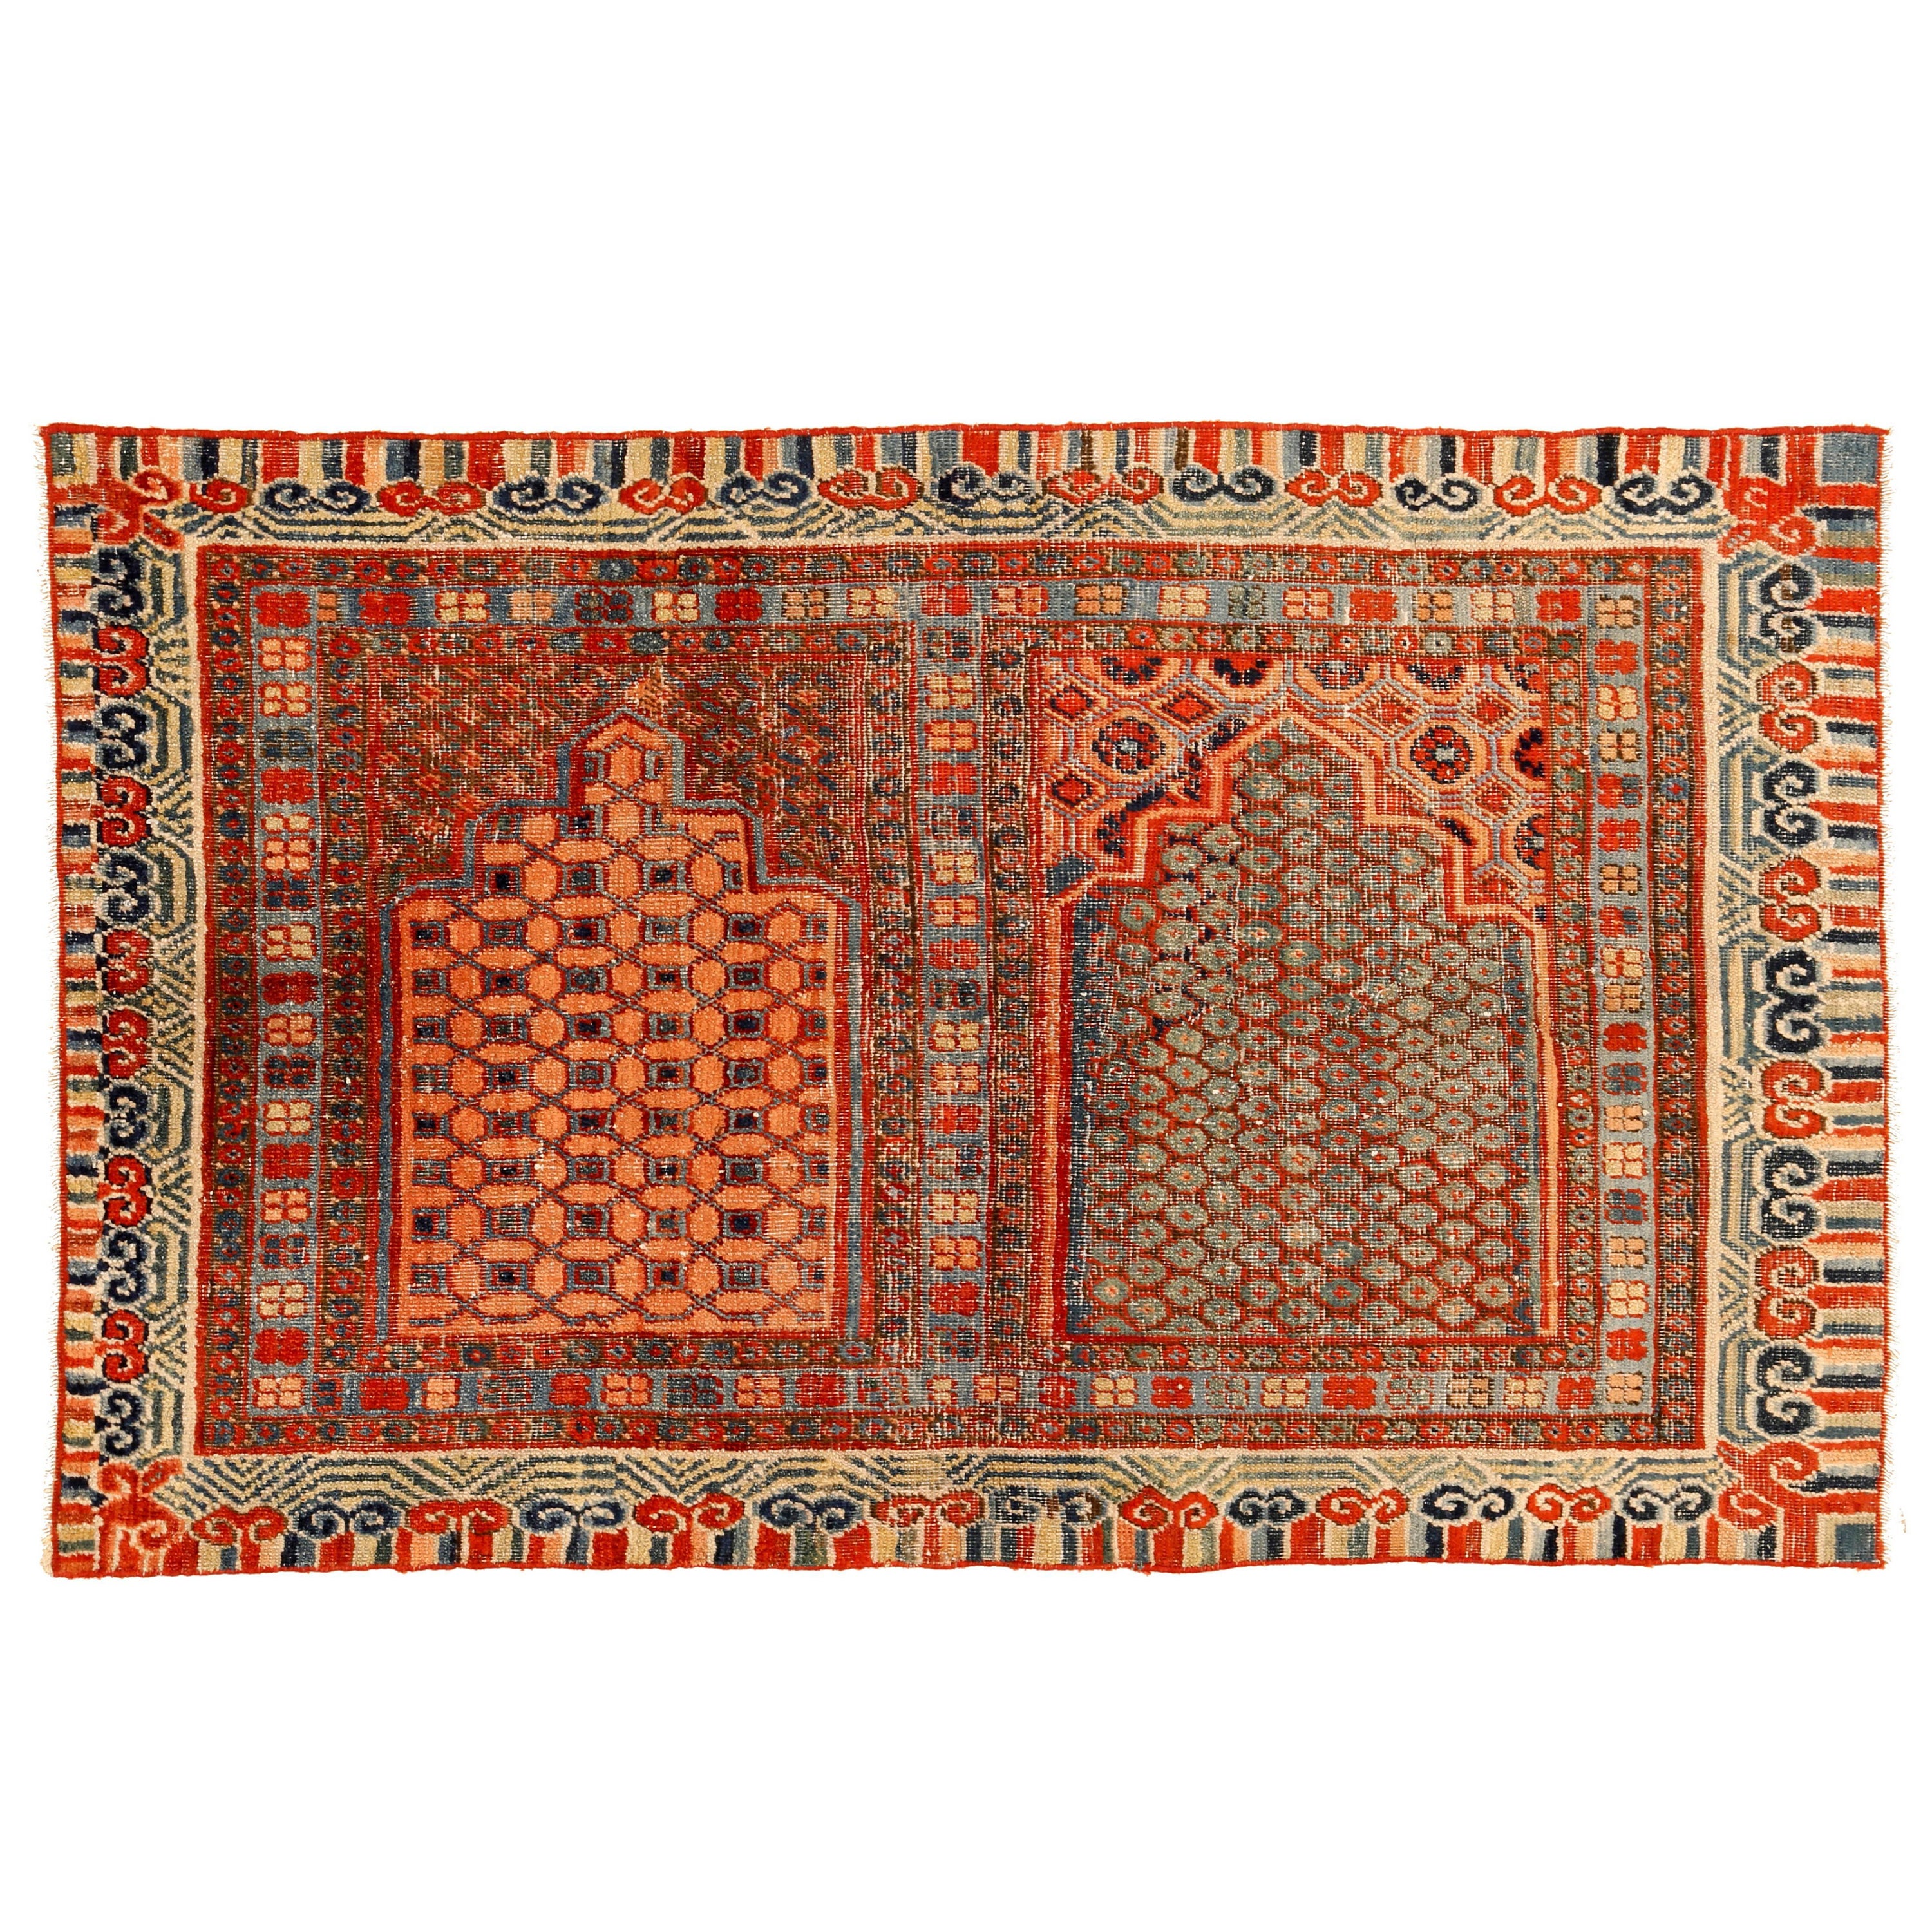 Rare and Early Khotan Rug with Two Niches For Sale